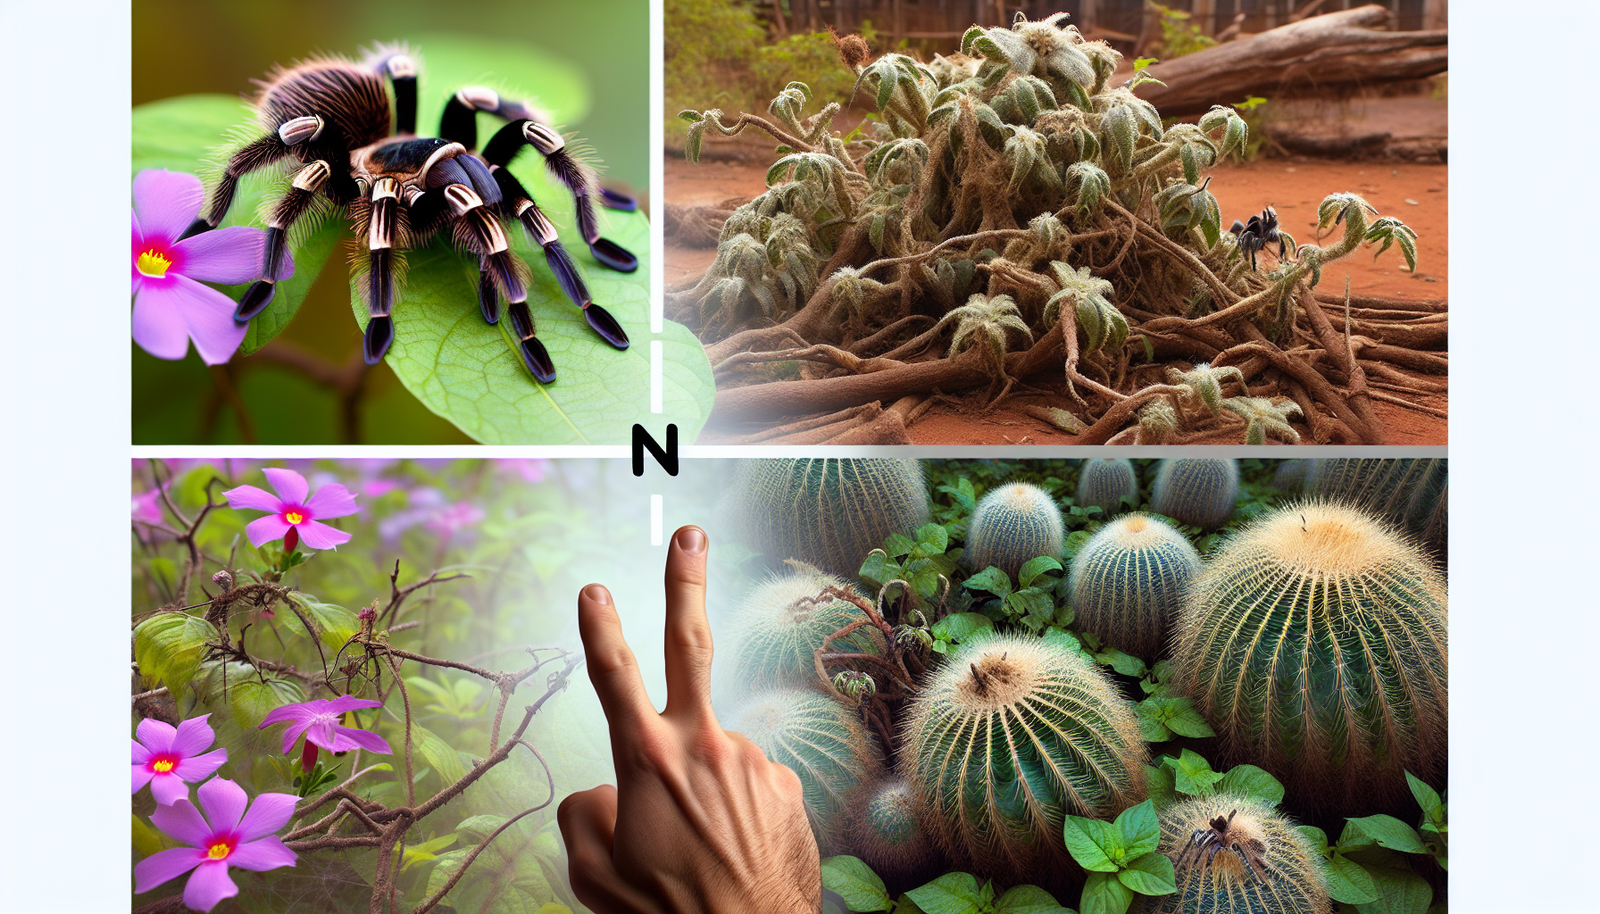 Can Tarantulas Face Threats From Invasive Plant Species Affecting Their Habitats?